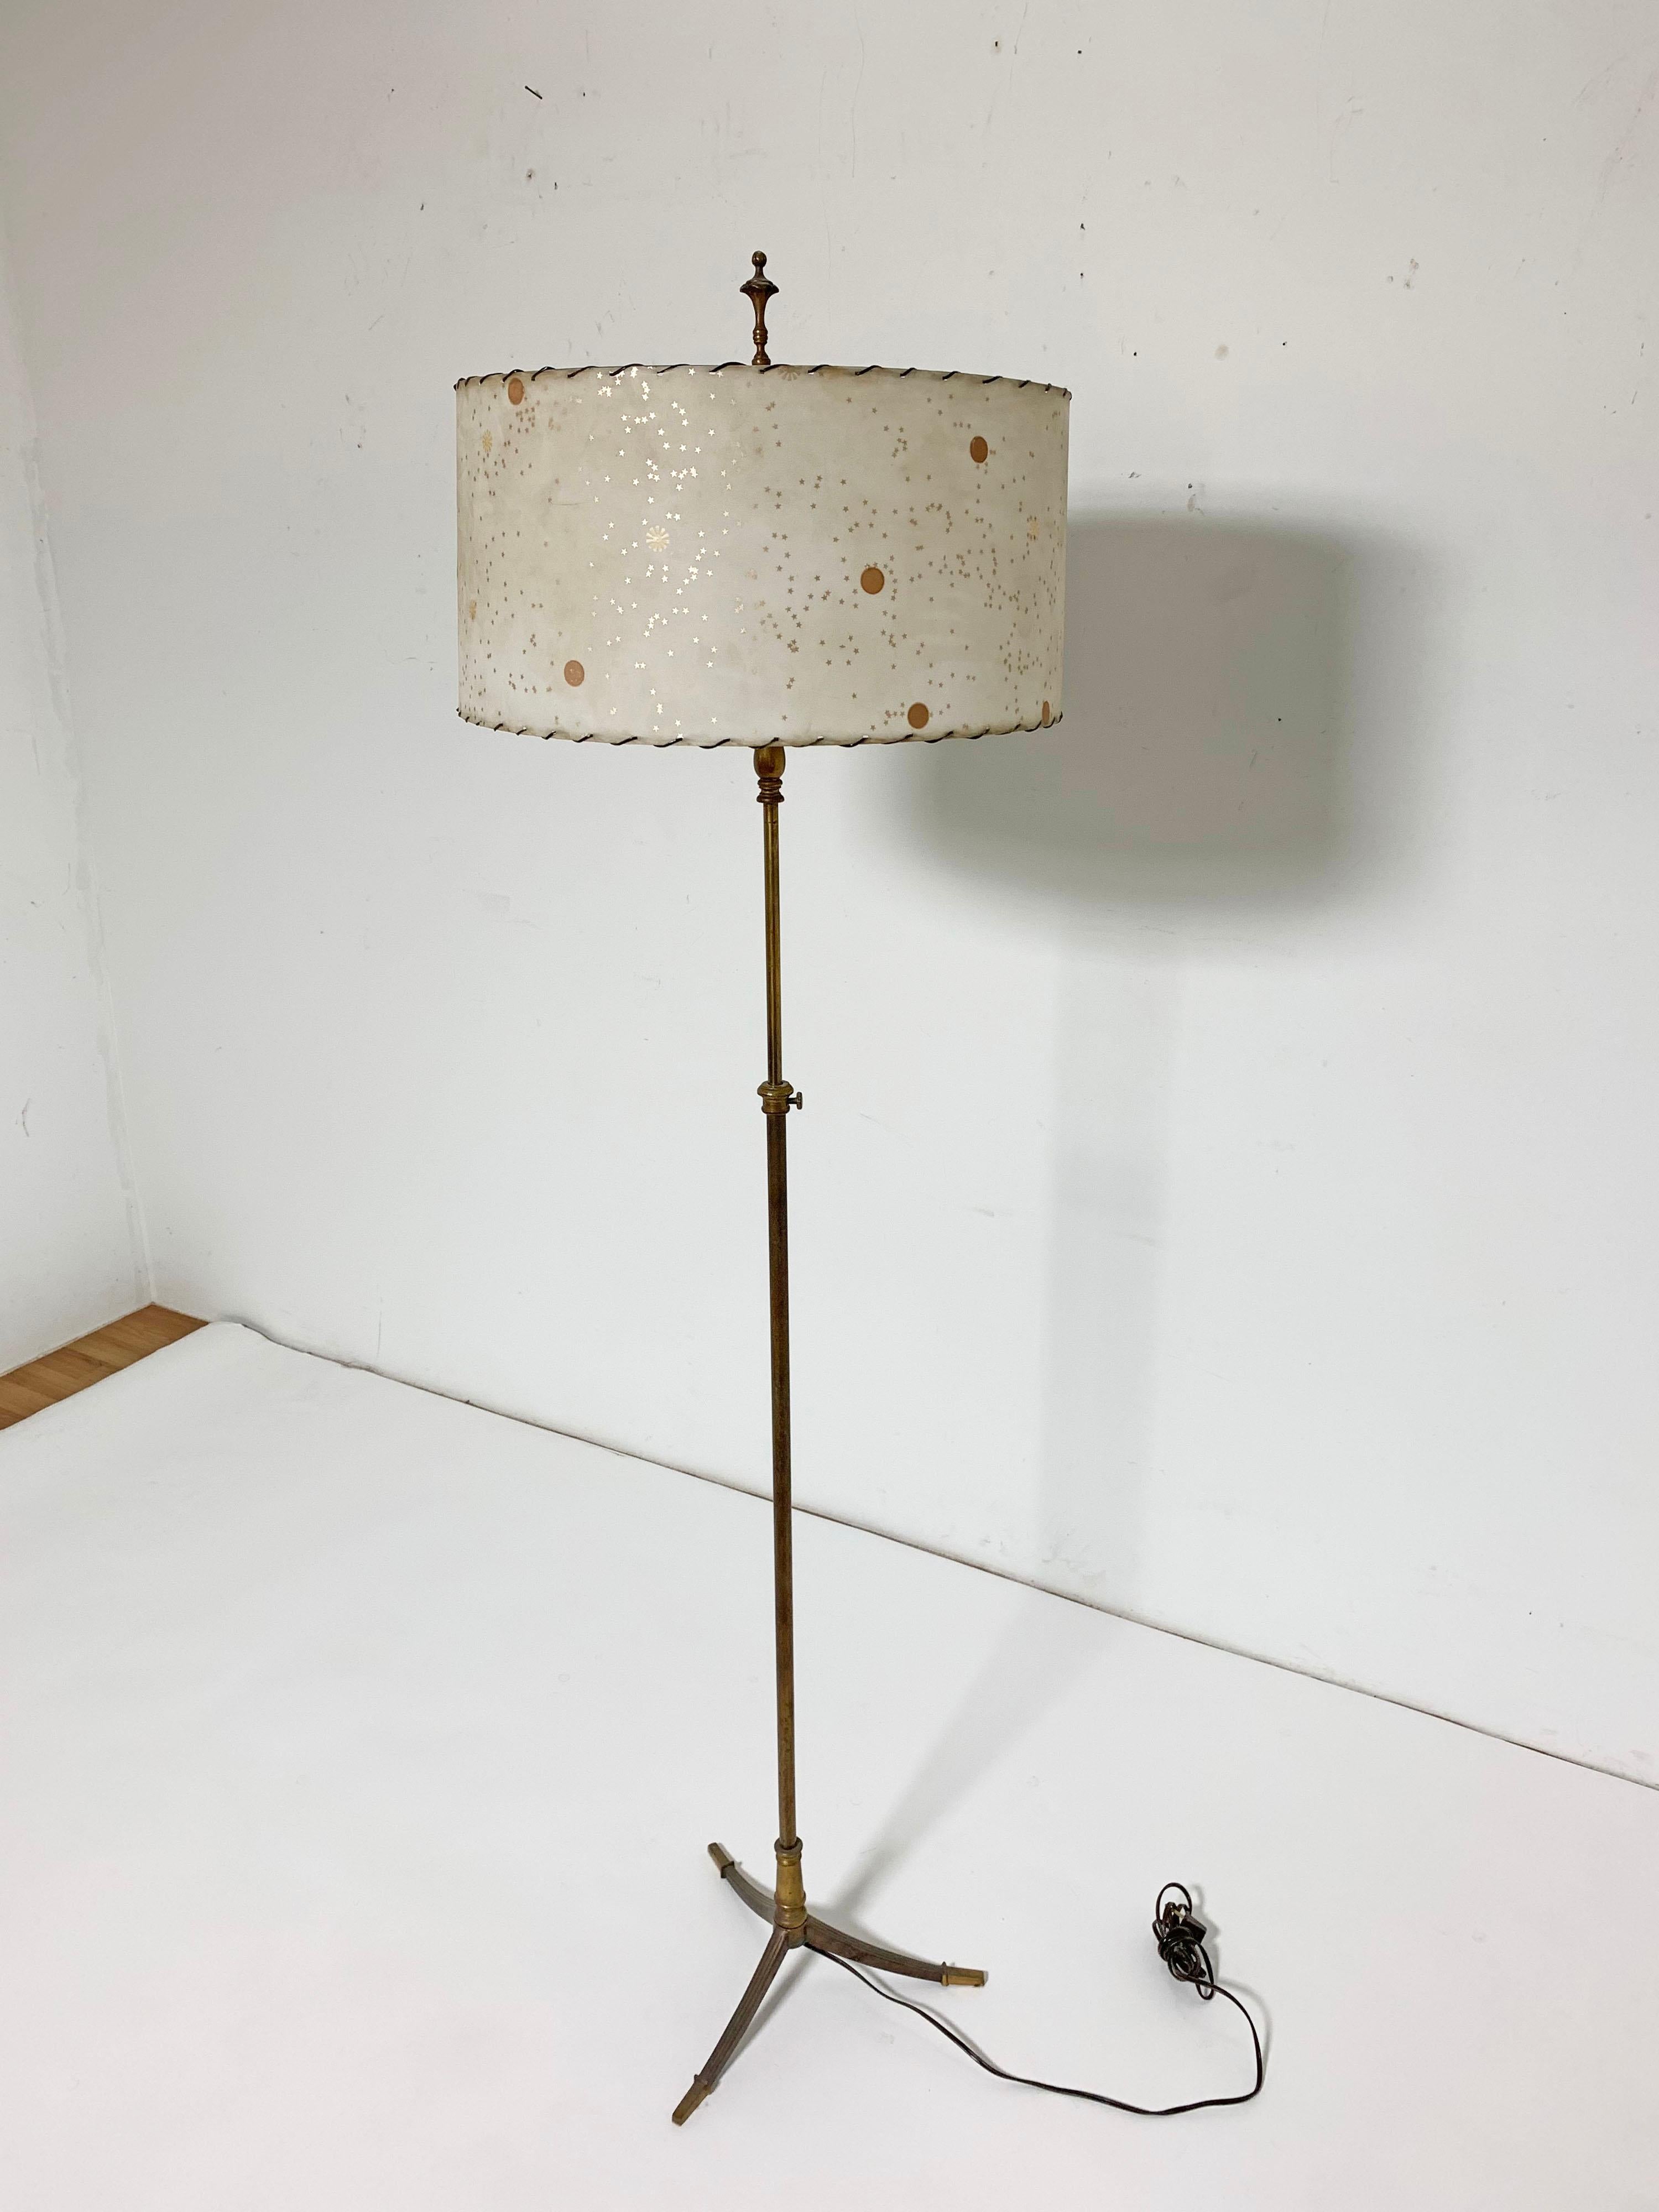 An adjustable height bronze floor lamp with tripod base and parchment shade, circa 1930s.
Measures: 65.5